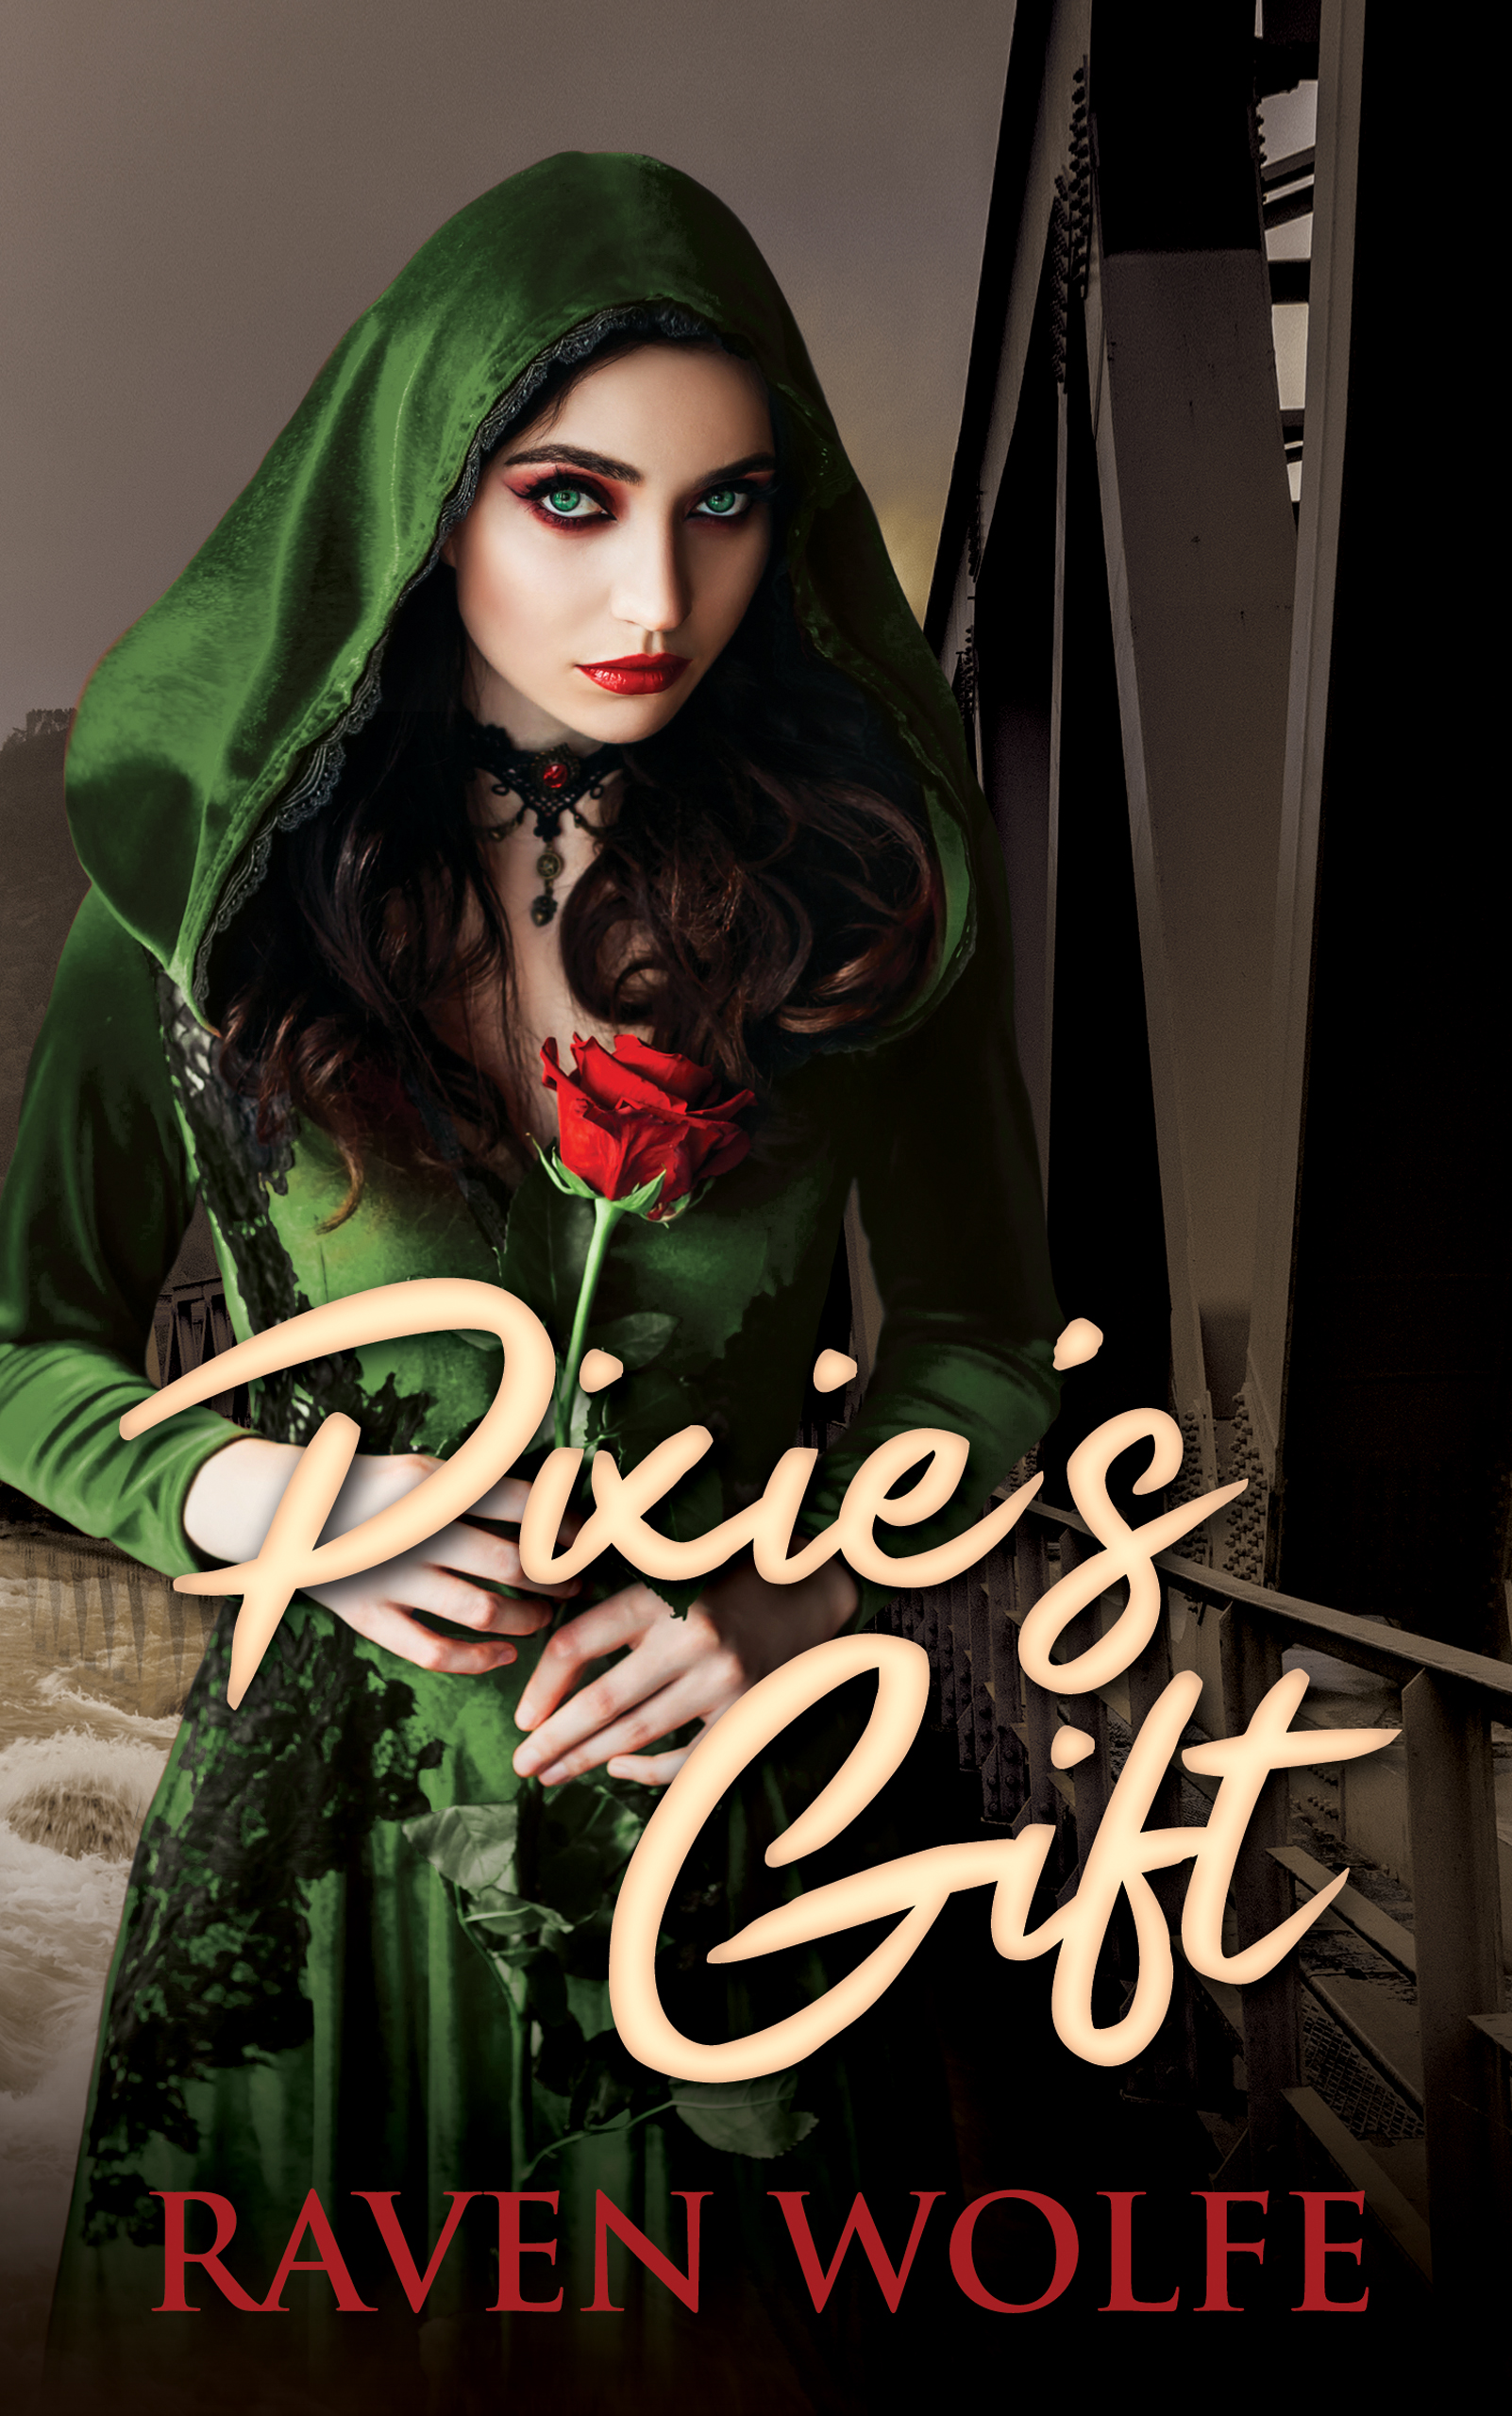 FREE: Pixie’s Gift by Raven Wolfe